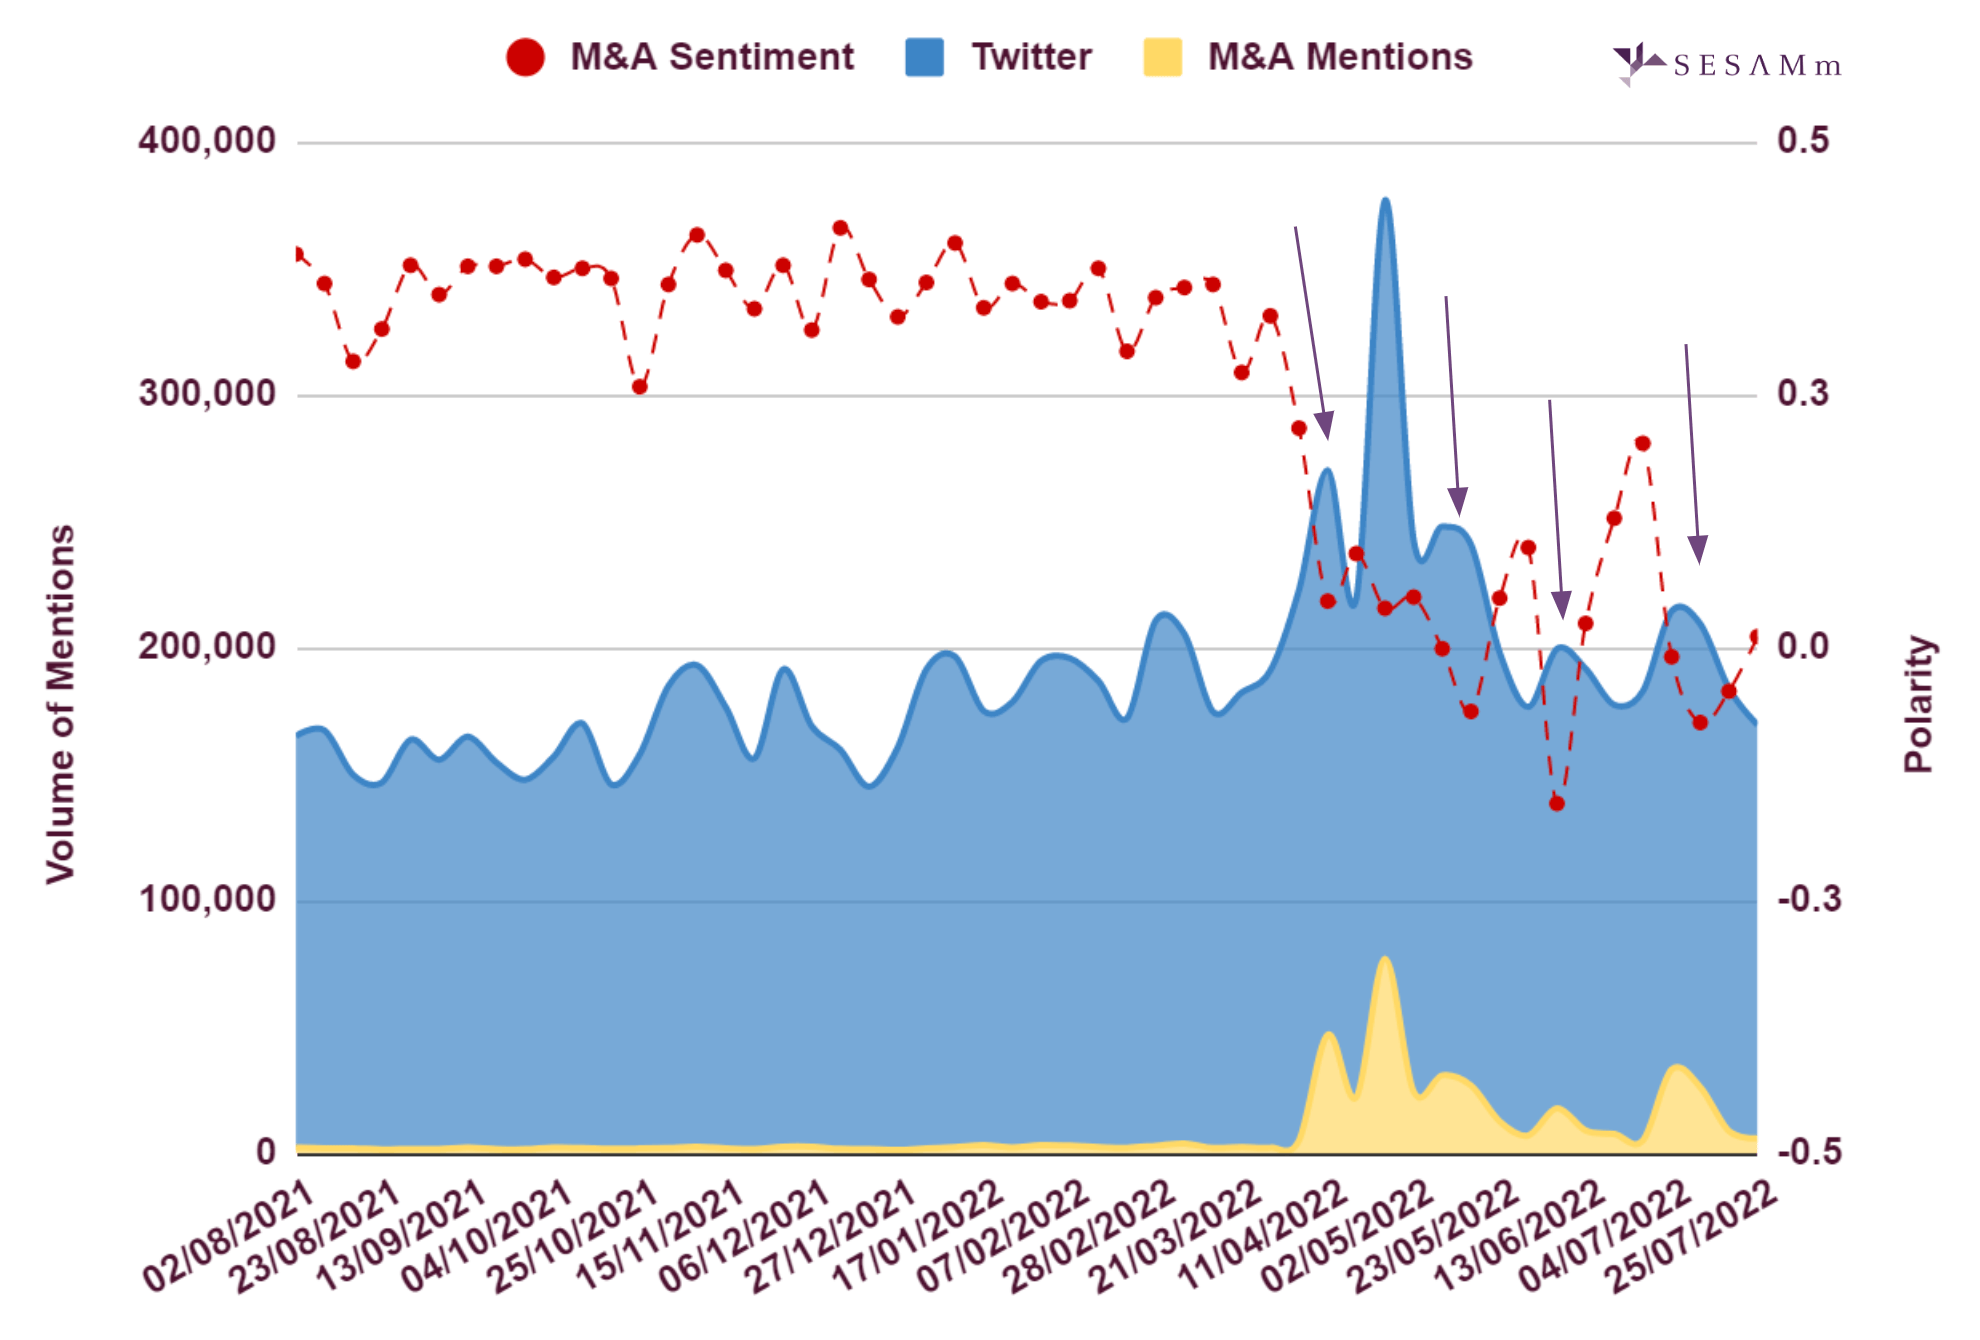 Mention volume and polarity chart for M&A and Twitter